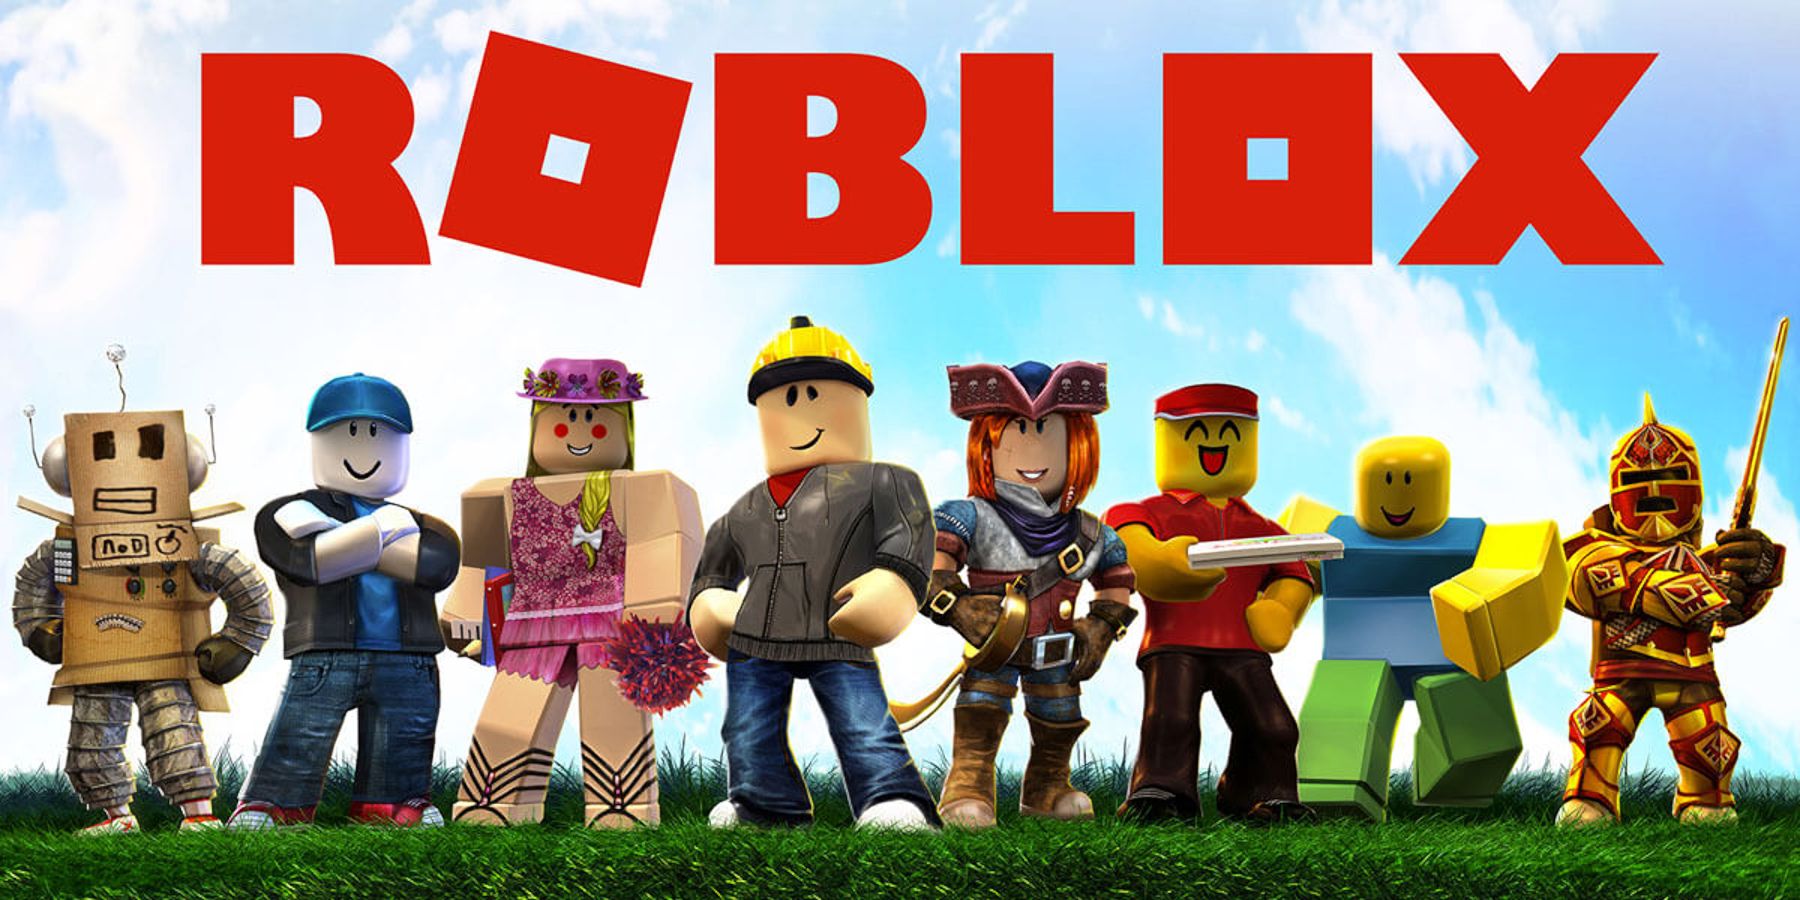 Roblox on X: Roblox is coming to @MetaQuestVR. Open Beta for